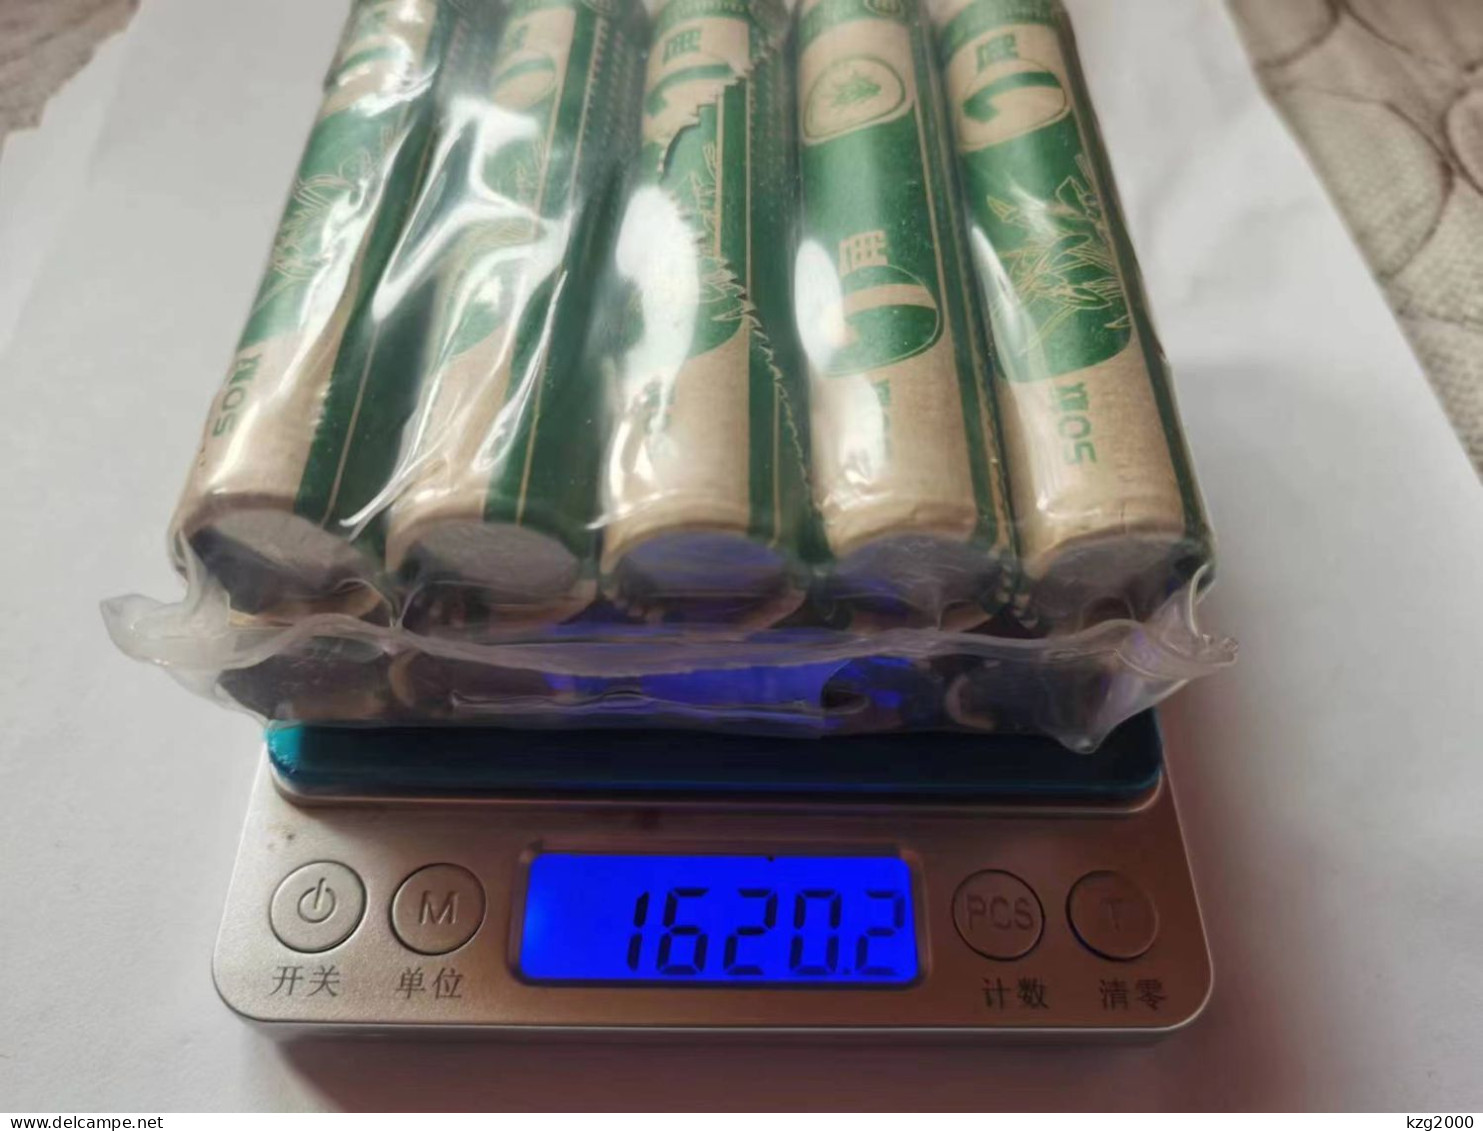 China Coin 2021  RMB 10 Fen  10 Cent  Steel Core Nickel Plating  10 Rolls X 50sets  = 500 Sets  500 Coins  500Pcs  1.6KG - China